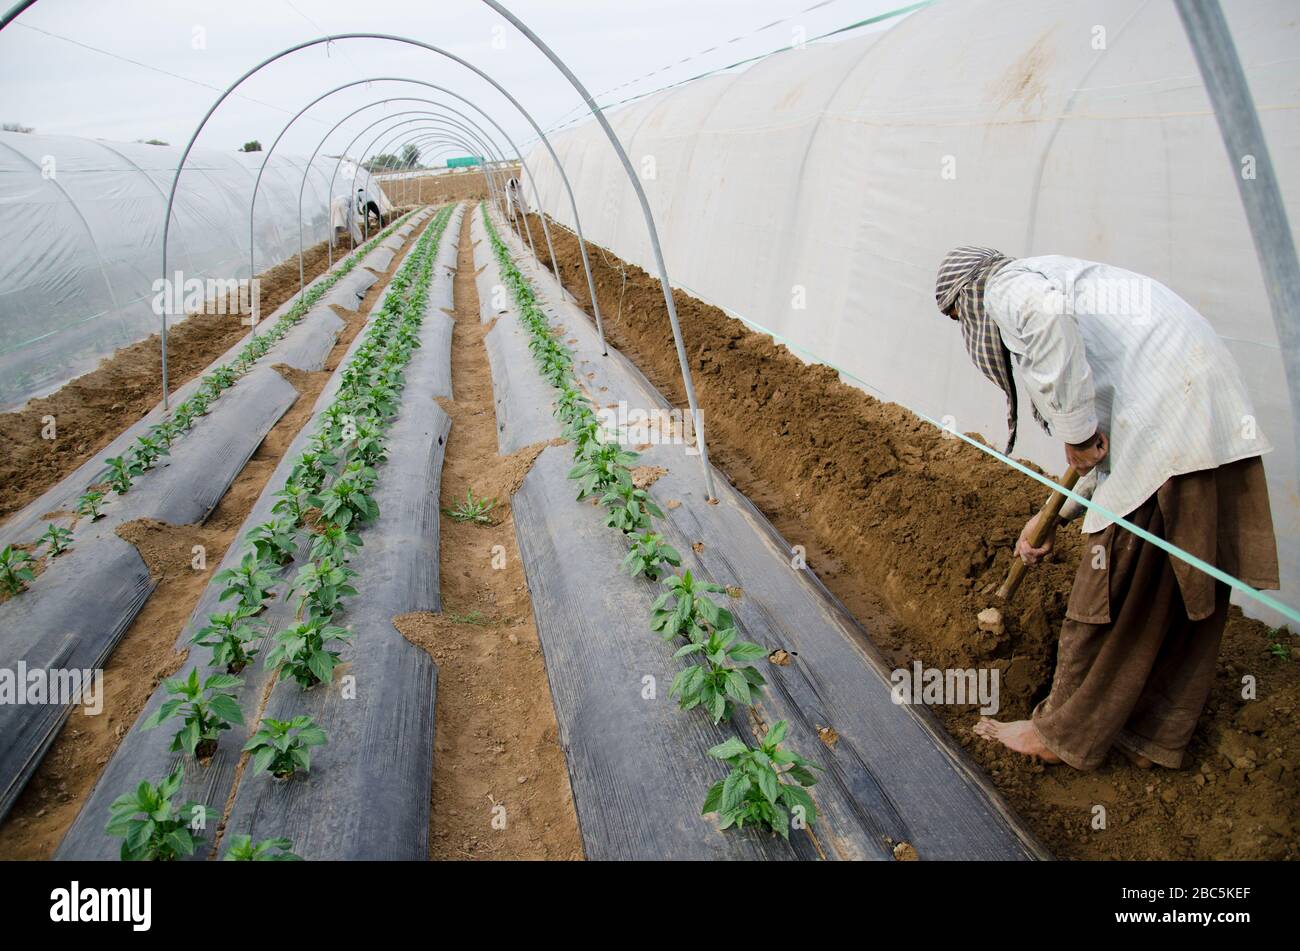 A worker in Agriomic agri farm in Balksasr Punjab prepares the soil before the plastic sheet is raised on the crop. Stock Photo